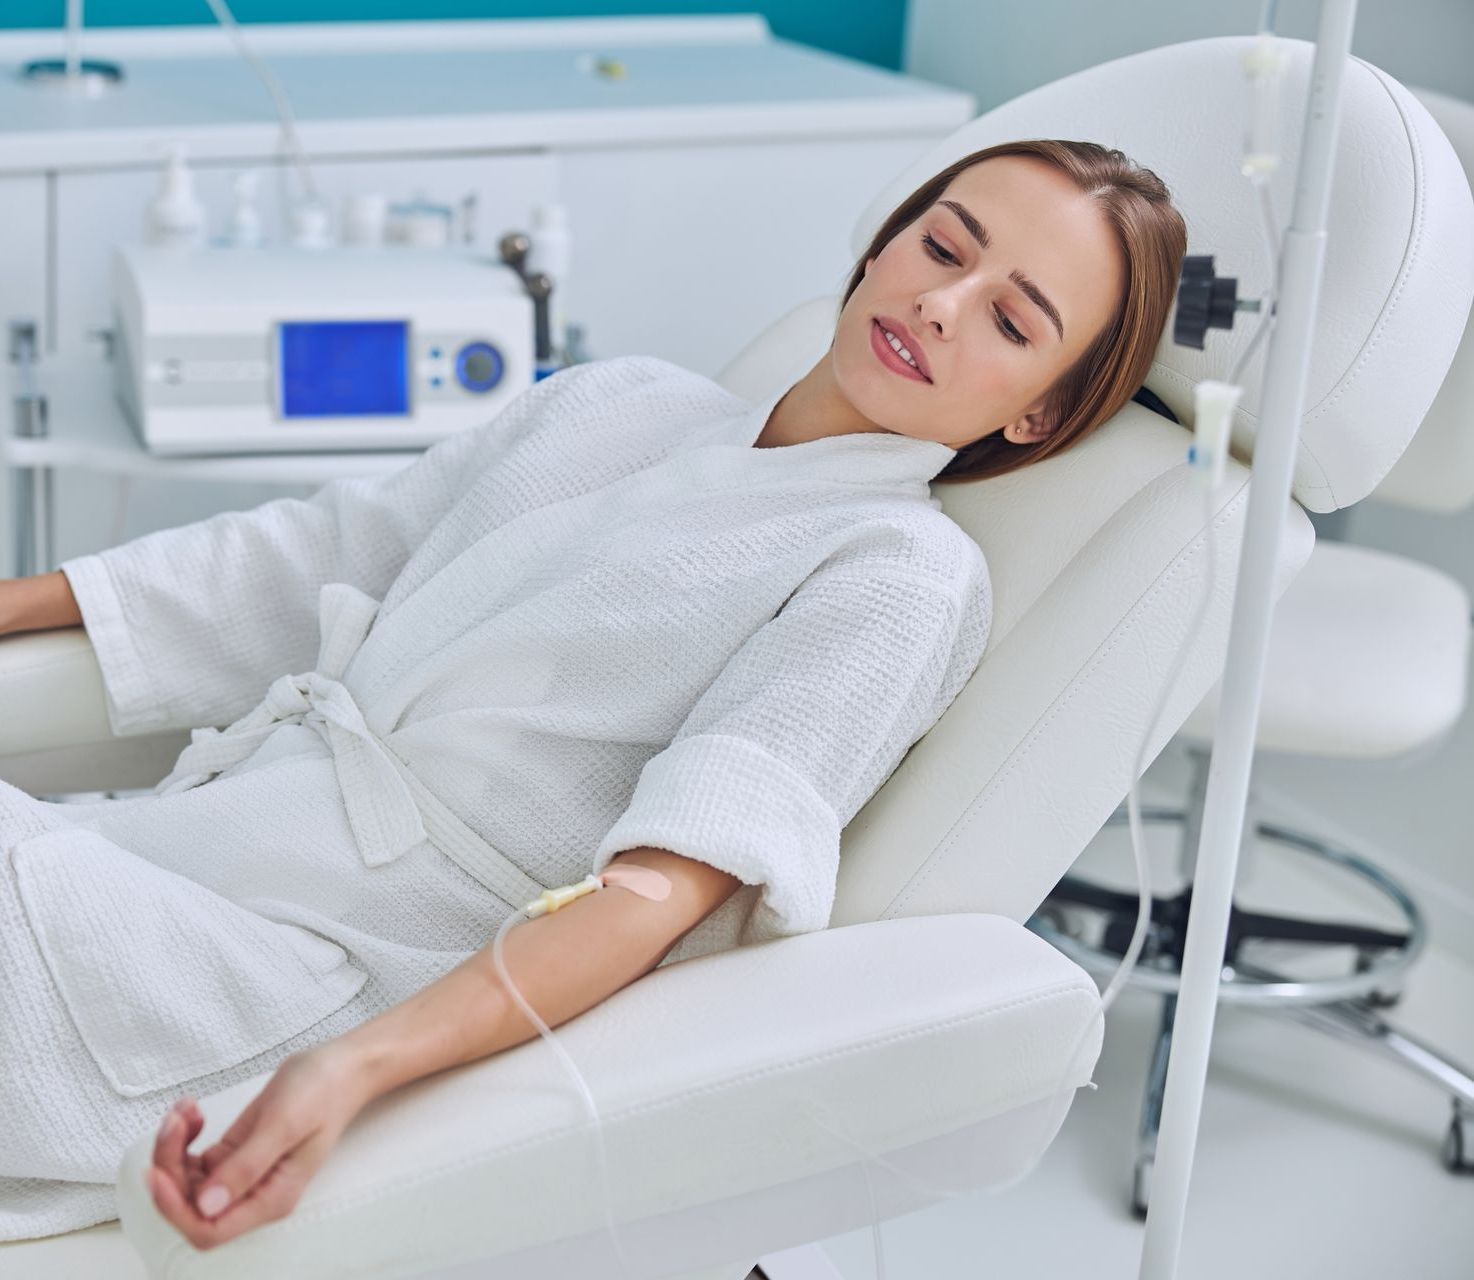 A woman is laying in a chair with an iv in her arm.